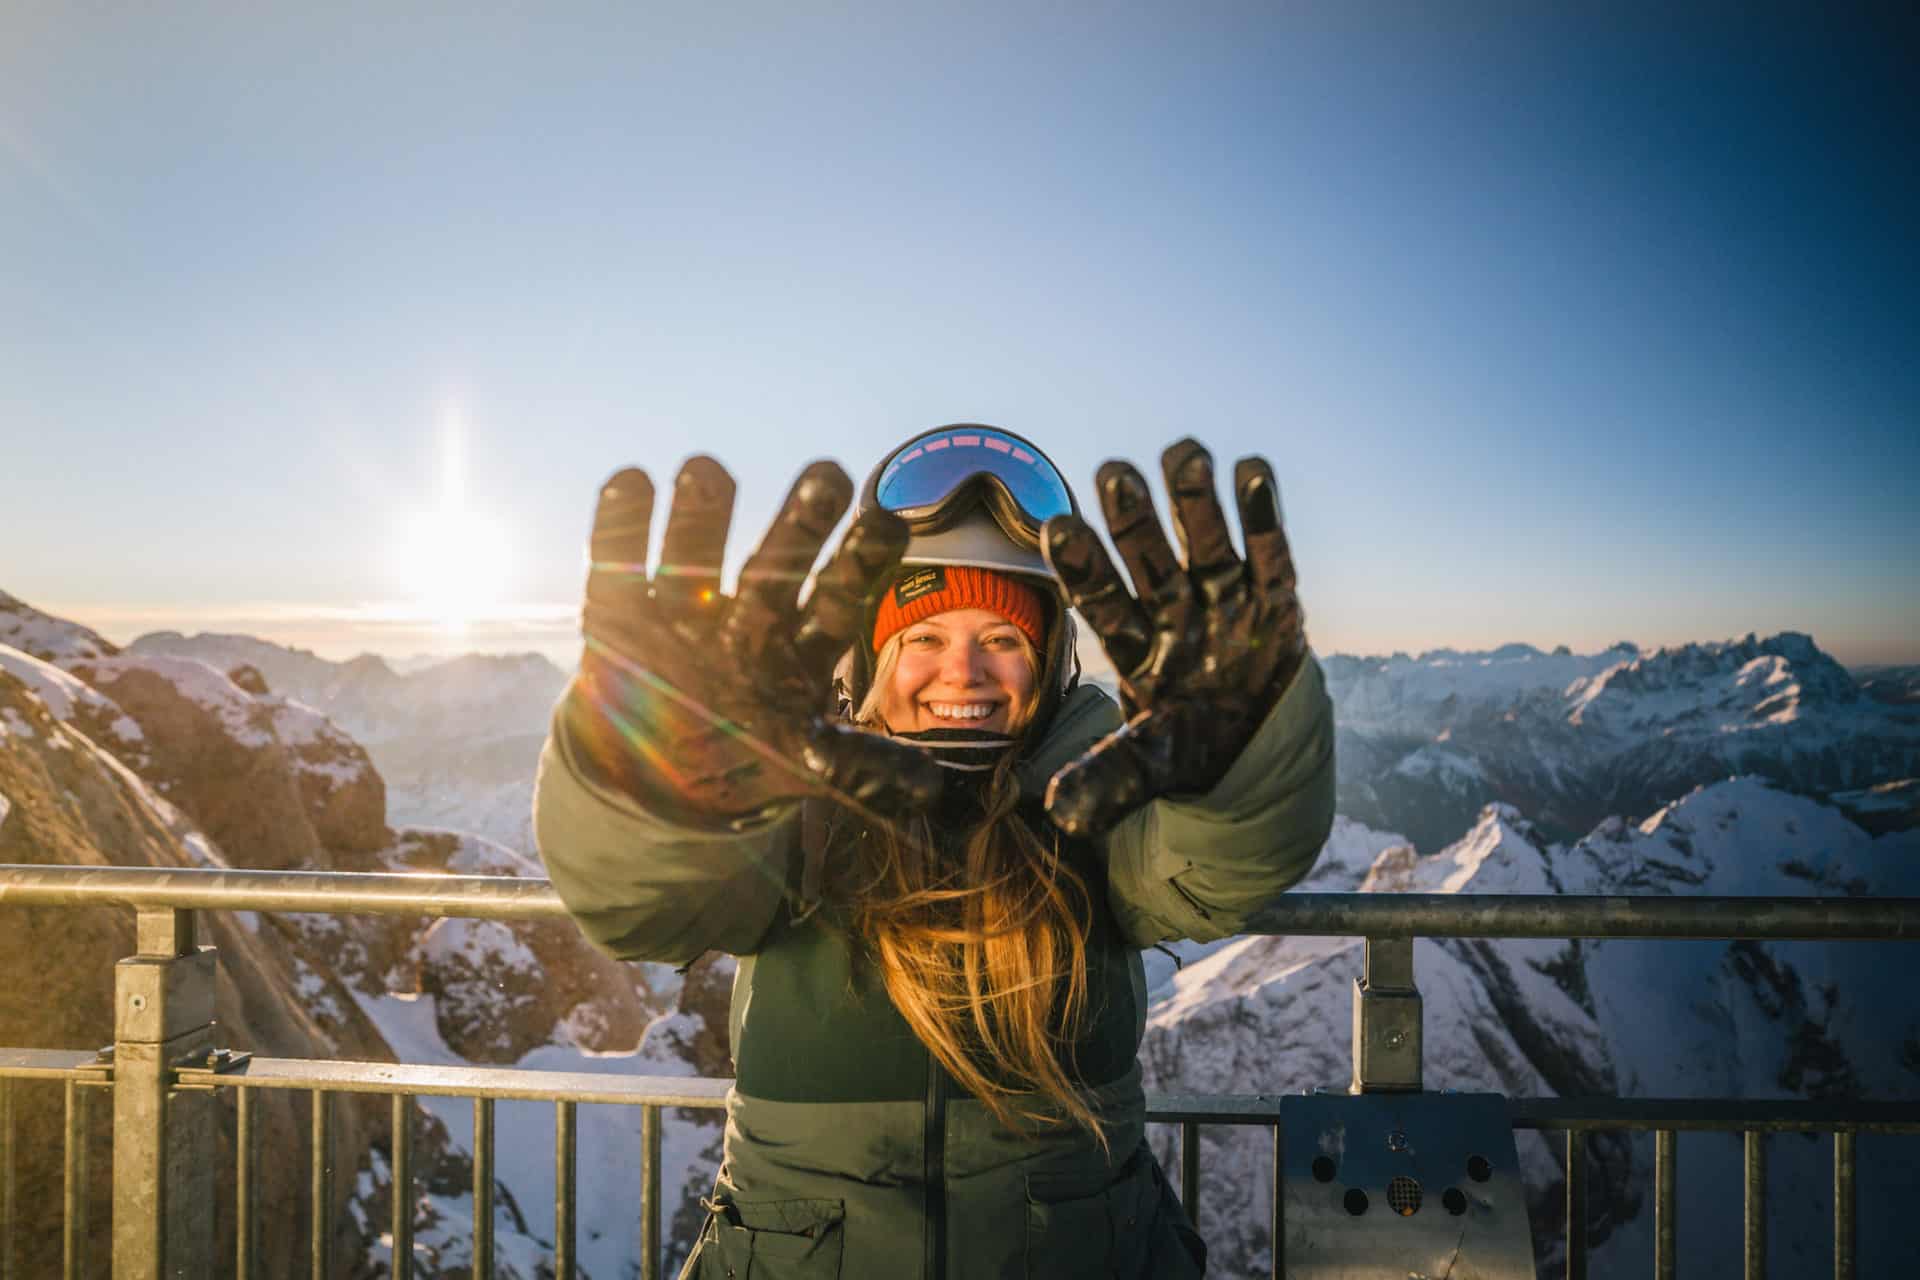 Queen of the Dolomites: sunrise on top of the world - Young Adventuress